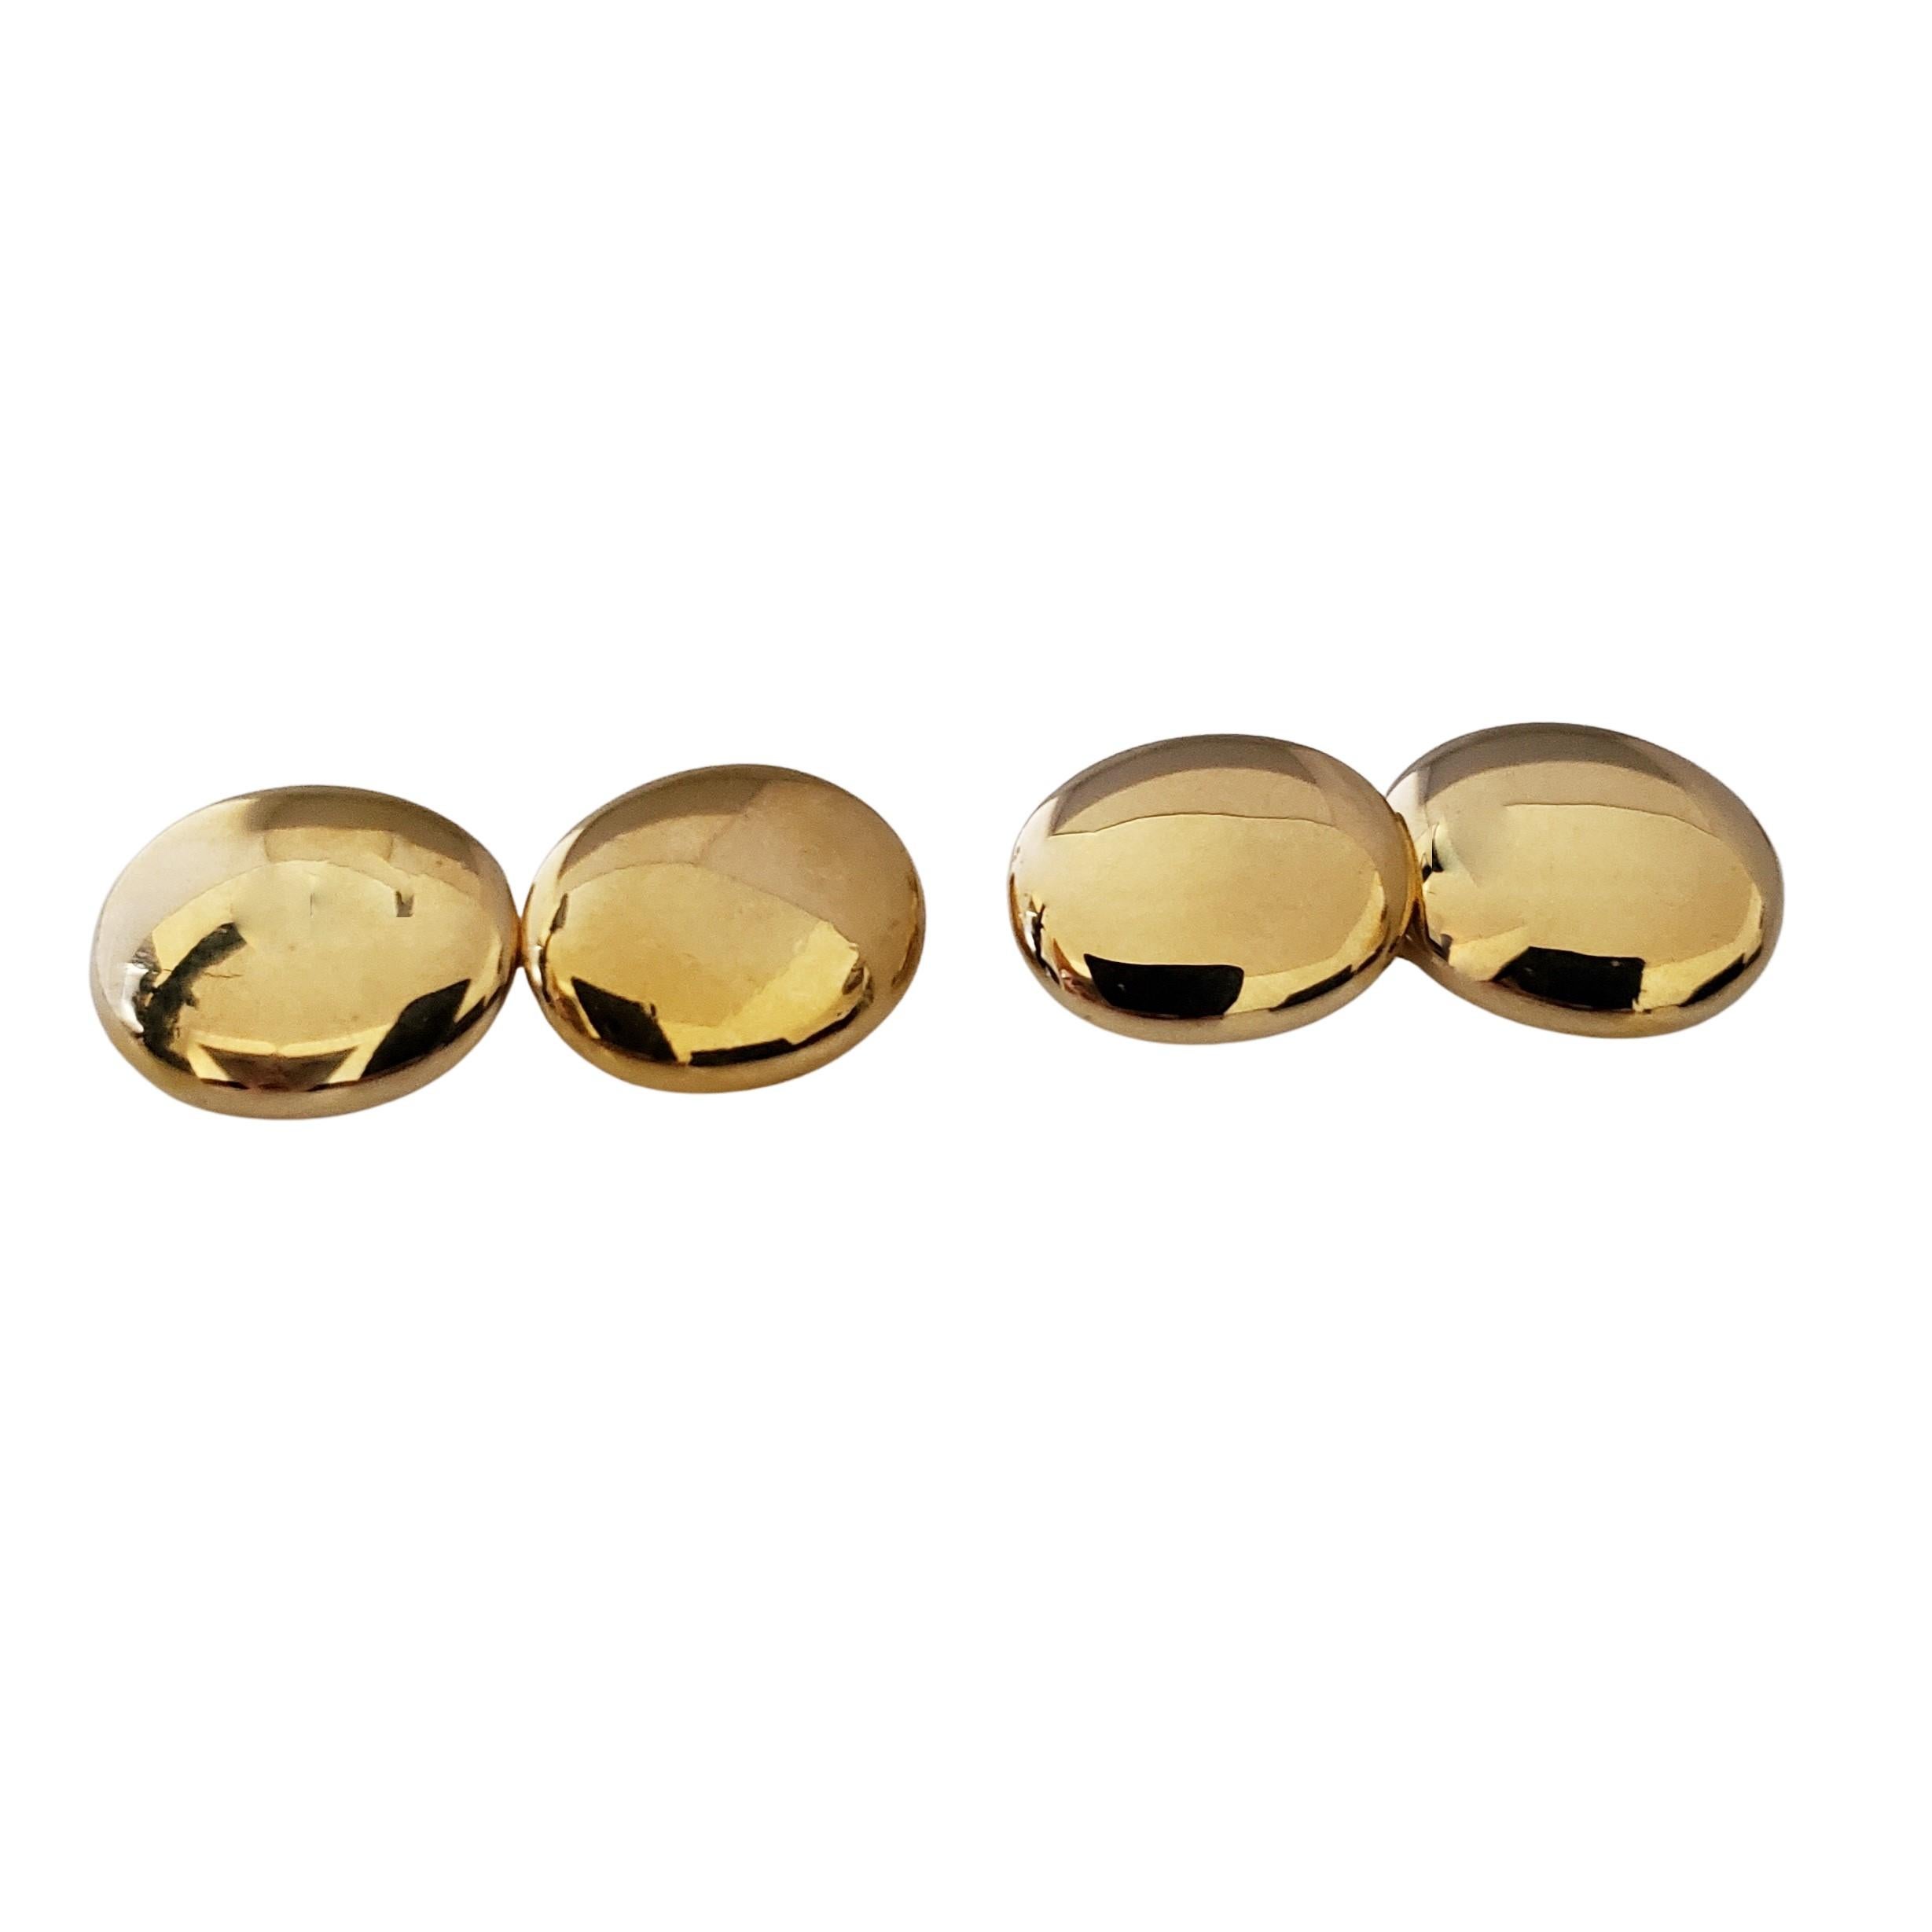 Vintage Tiffany & Co. 18 Karat Yellow Gold Cufflinks-

These elegant cufflinks by Tiffany & Co. are crafted in beautifully detailed 18K yellow gold.

Size: 16 mm x 13 mm

Weight: 11.1 dwt. / 17.4 gr.

Hallmark: Tiffany & Co.

Tested 18K gold.

Very